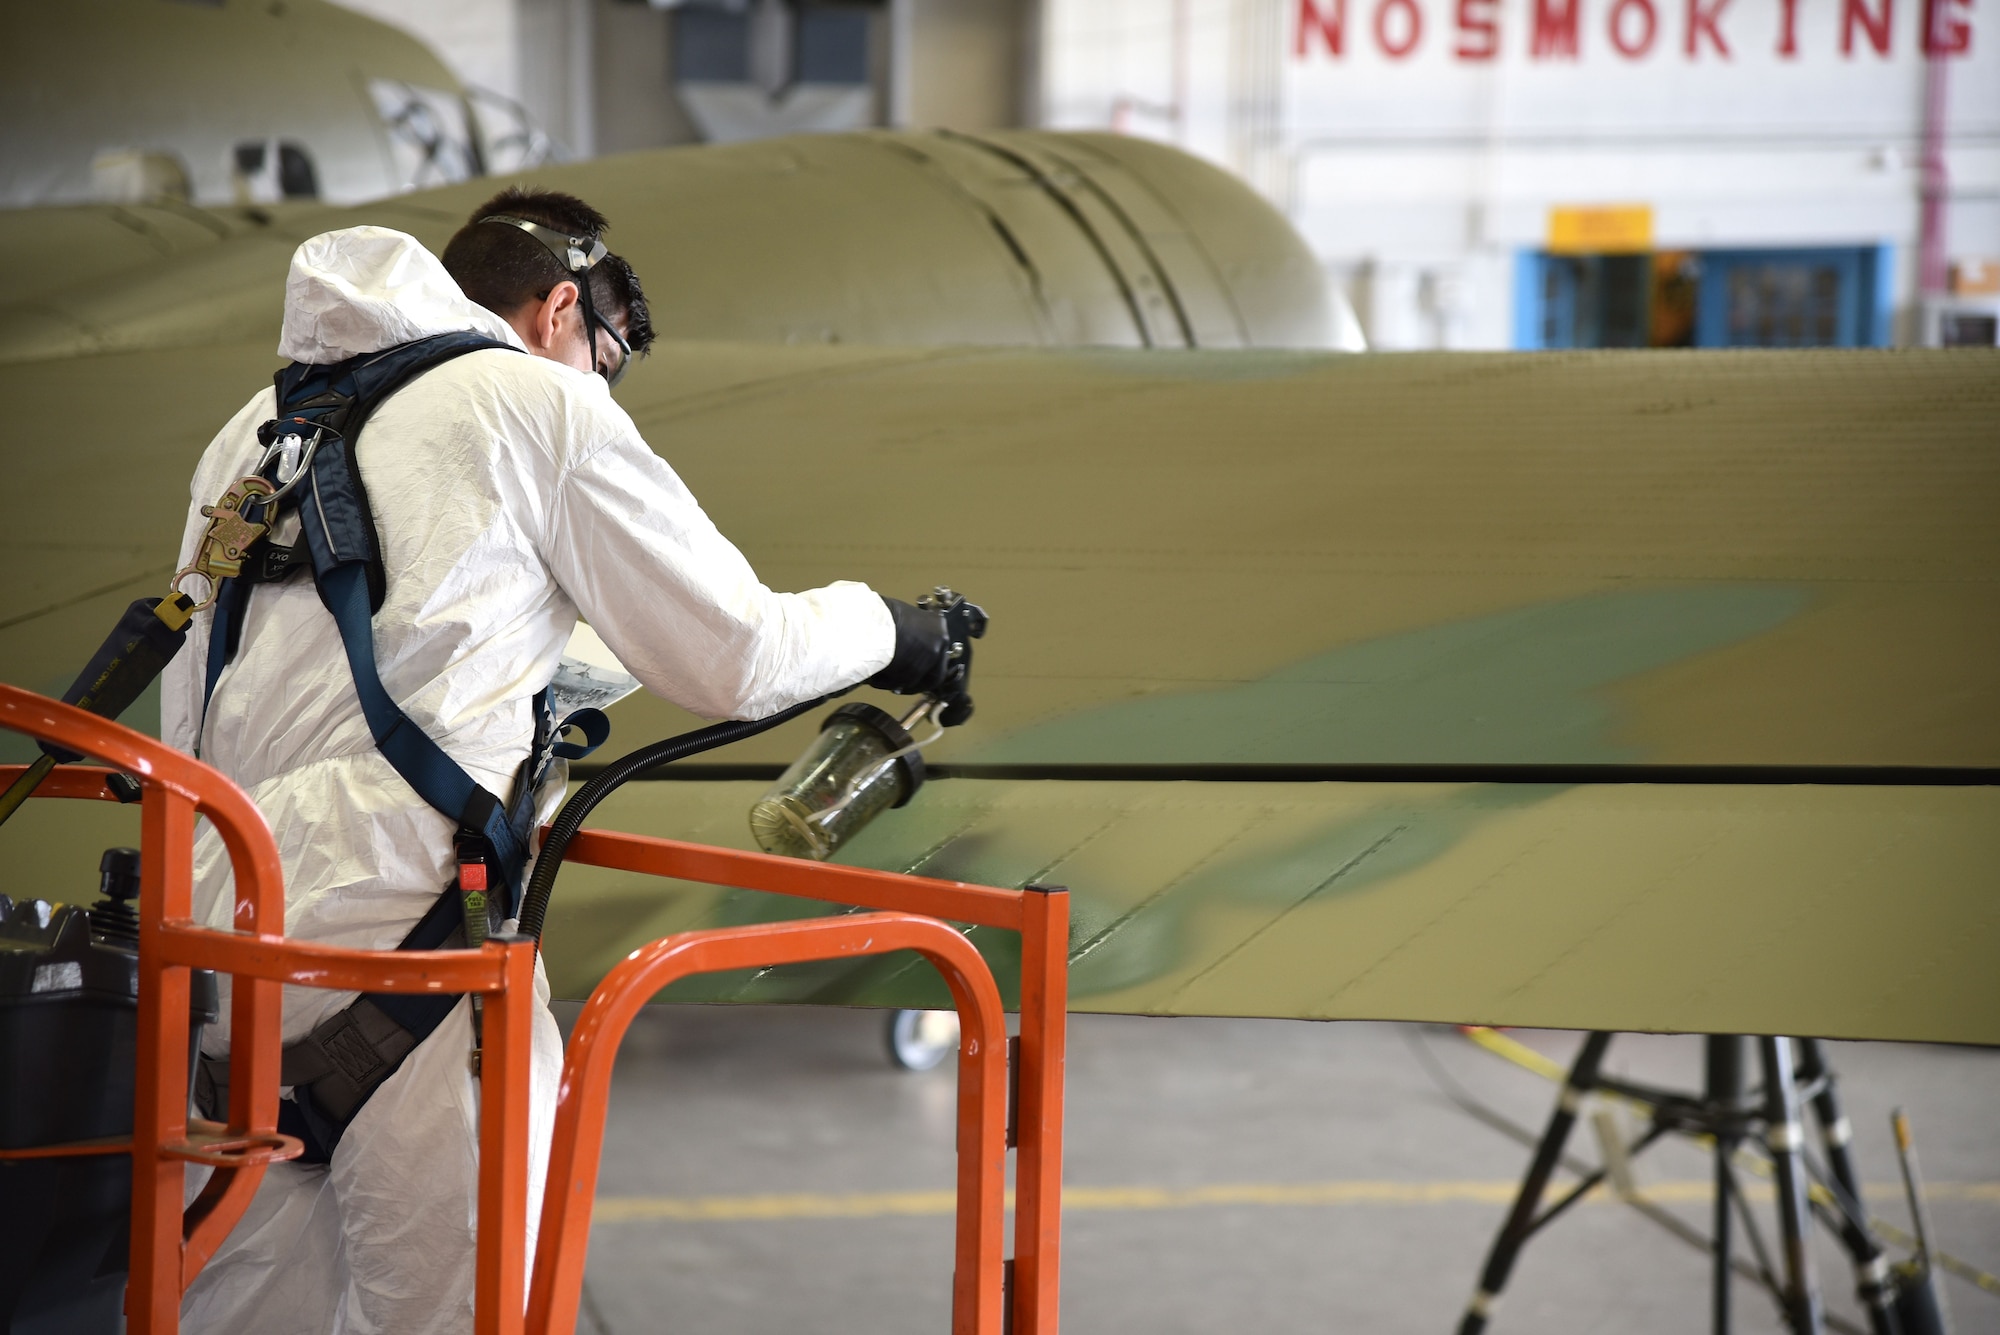 DAYTON, Ohio (12/28/2017) -- National Museum of the U.S. Air Force restoration specialist Casey Simmons paints the control surfaces on the Boeing B-17F Memphis Belle™. Plans call for the aircraft to be placed on permanent public display in the WWII Gallery here at the National Museum of the U.S. Air Force on May 17, 2018. (U.S. Air Force photo by Ken LaRock)